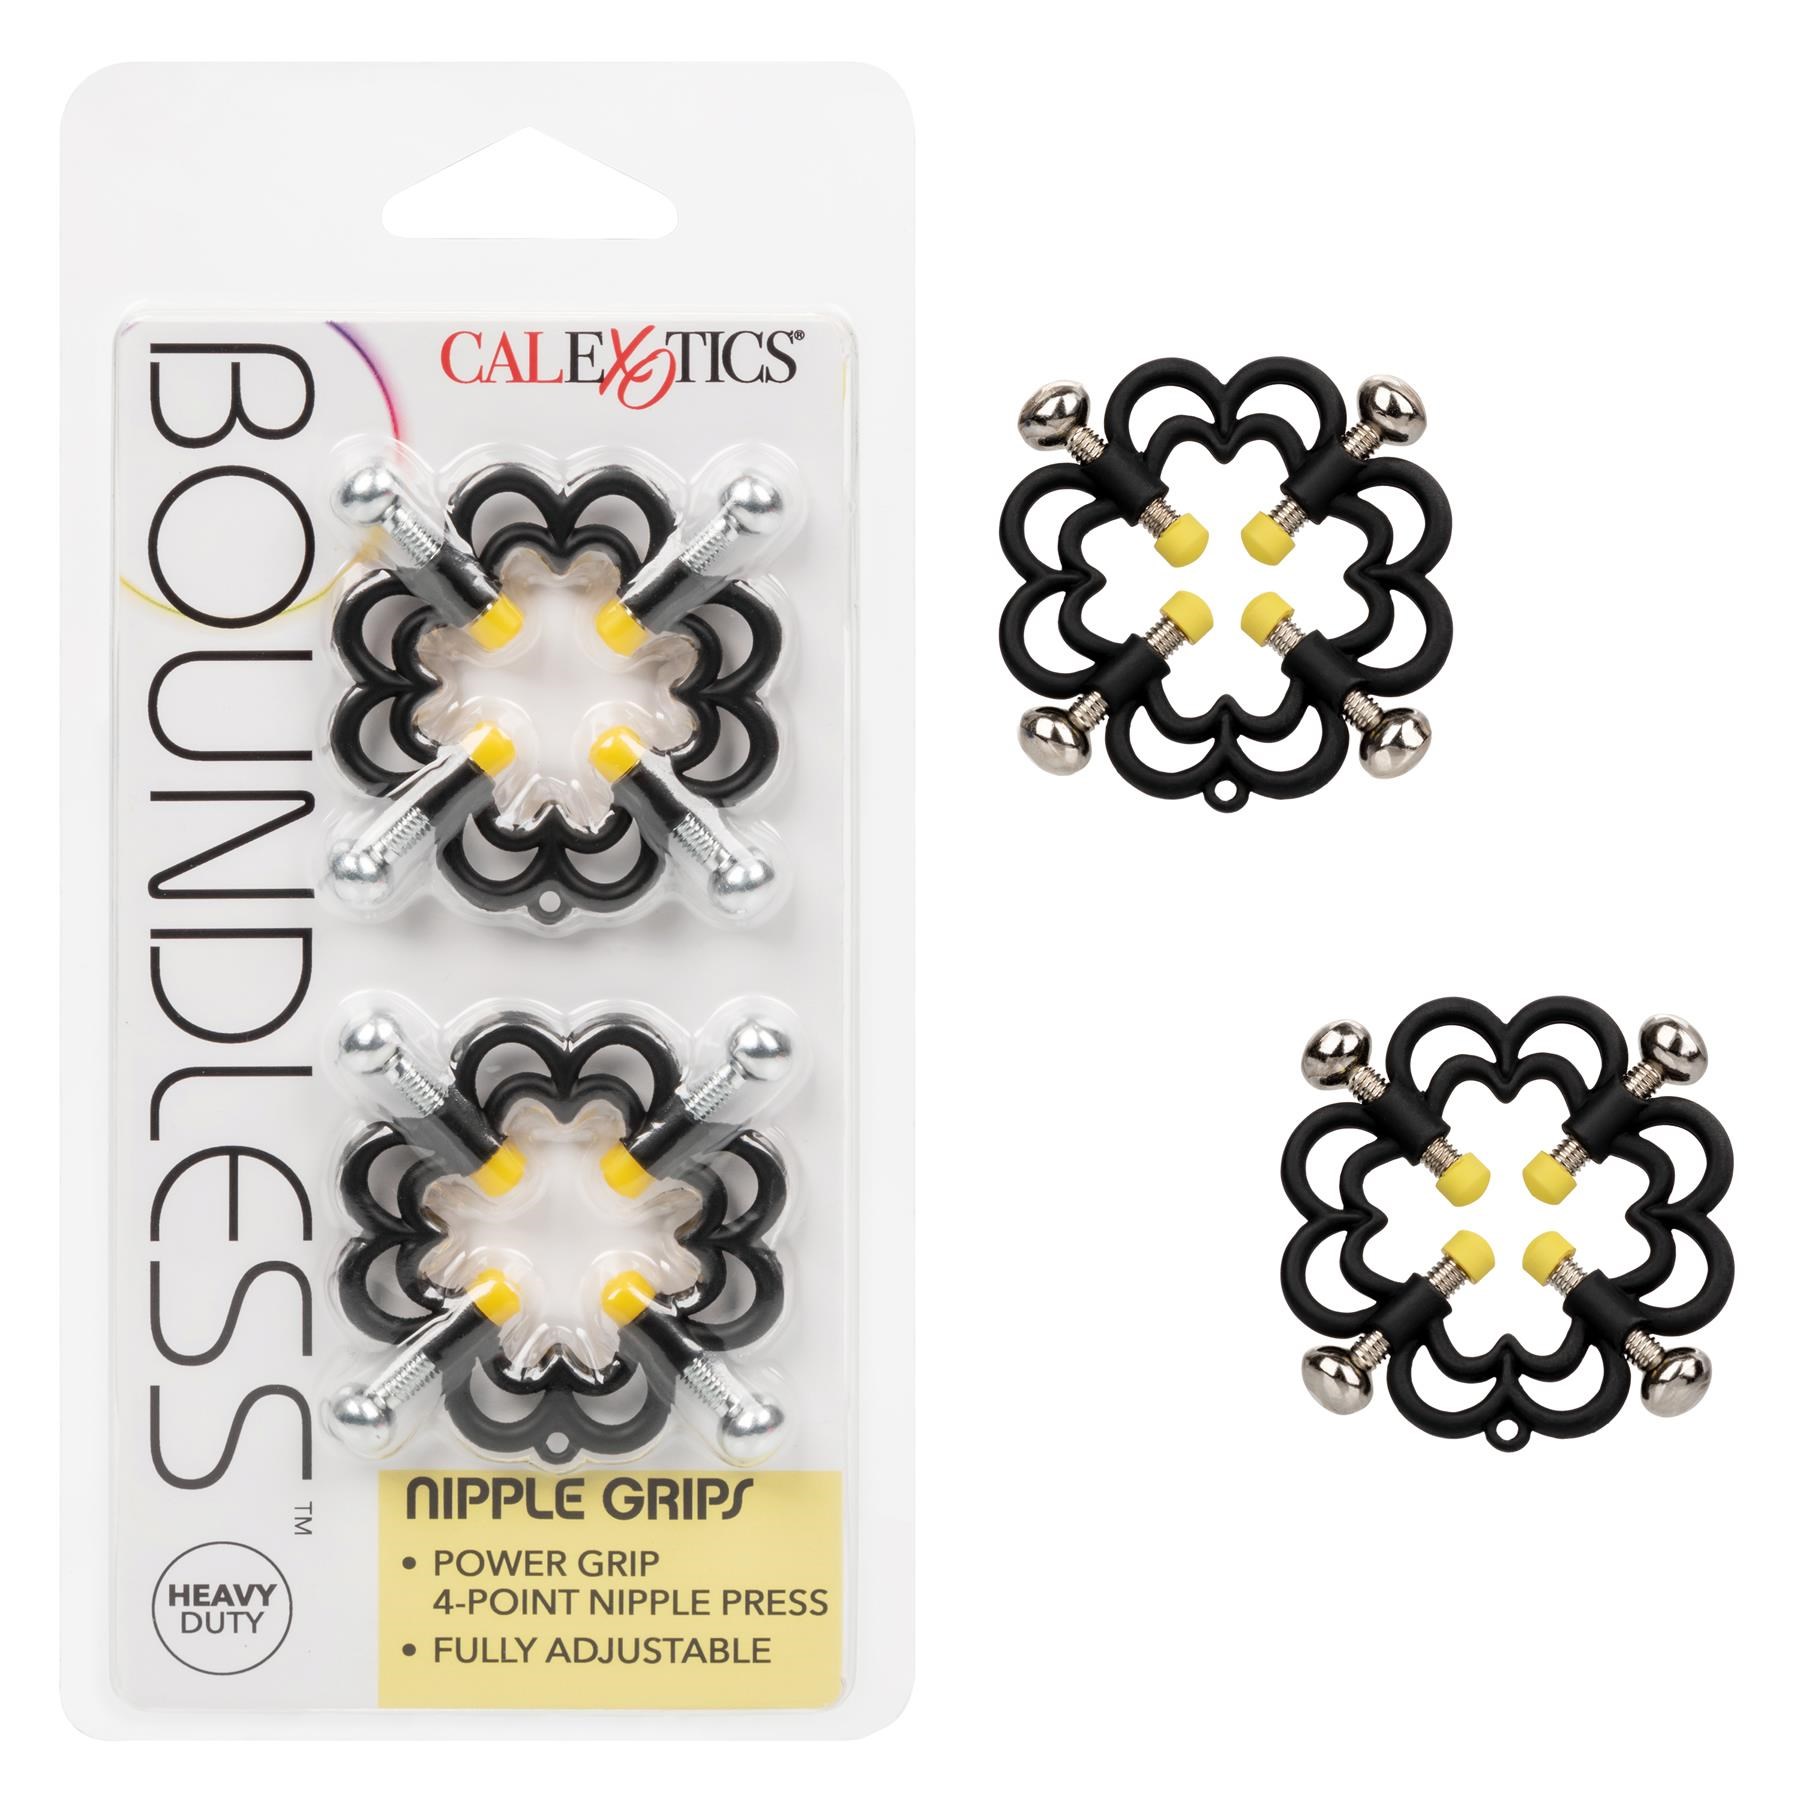 Boundless Nipple Grips - Product and Packaging